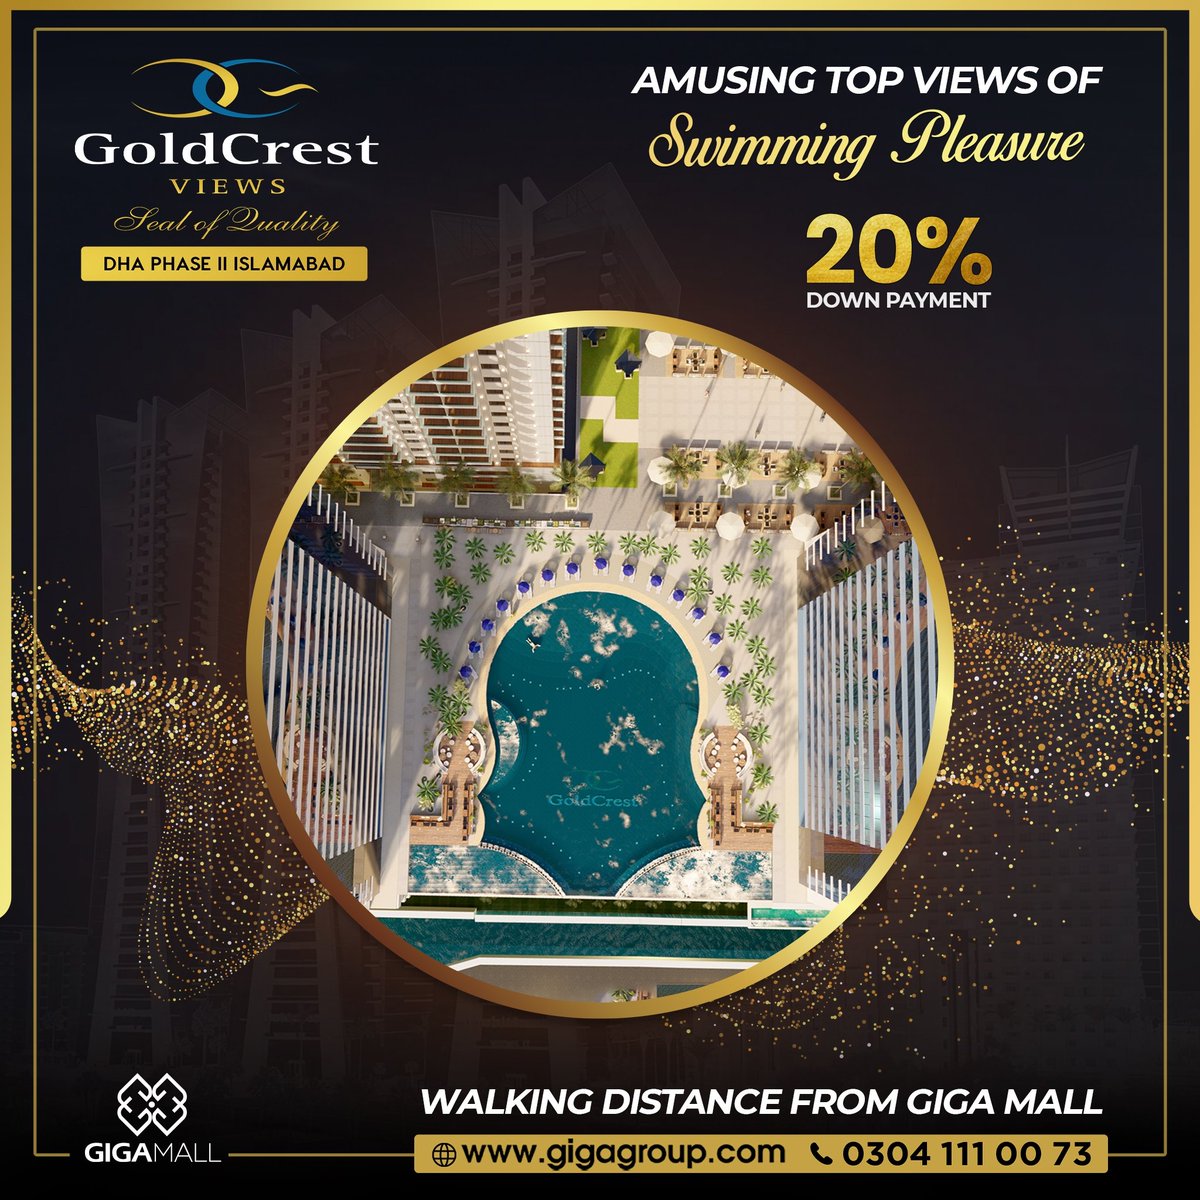 Amusing top views of swimming pleasure! 𝐆𝐨𝐥𝐝𝐜𝐫𝐞𝐬𝐭 𝐕𝐢𝐞𝐰𝐬 offers breathtaking panoramic views and world class amenities. It is a 40-storey residential complex by Giga Group located at prime location of Defence Housing Authority (DHA) Phase II Islamabad. Don't wait to…